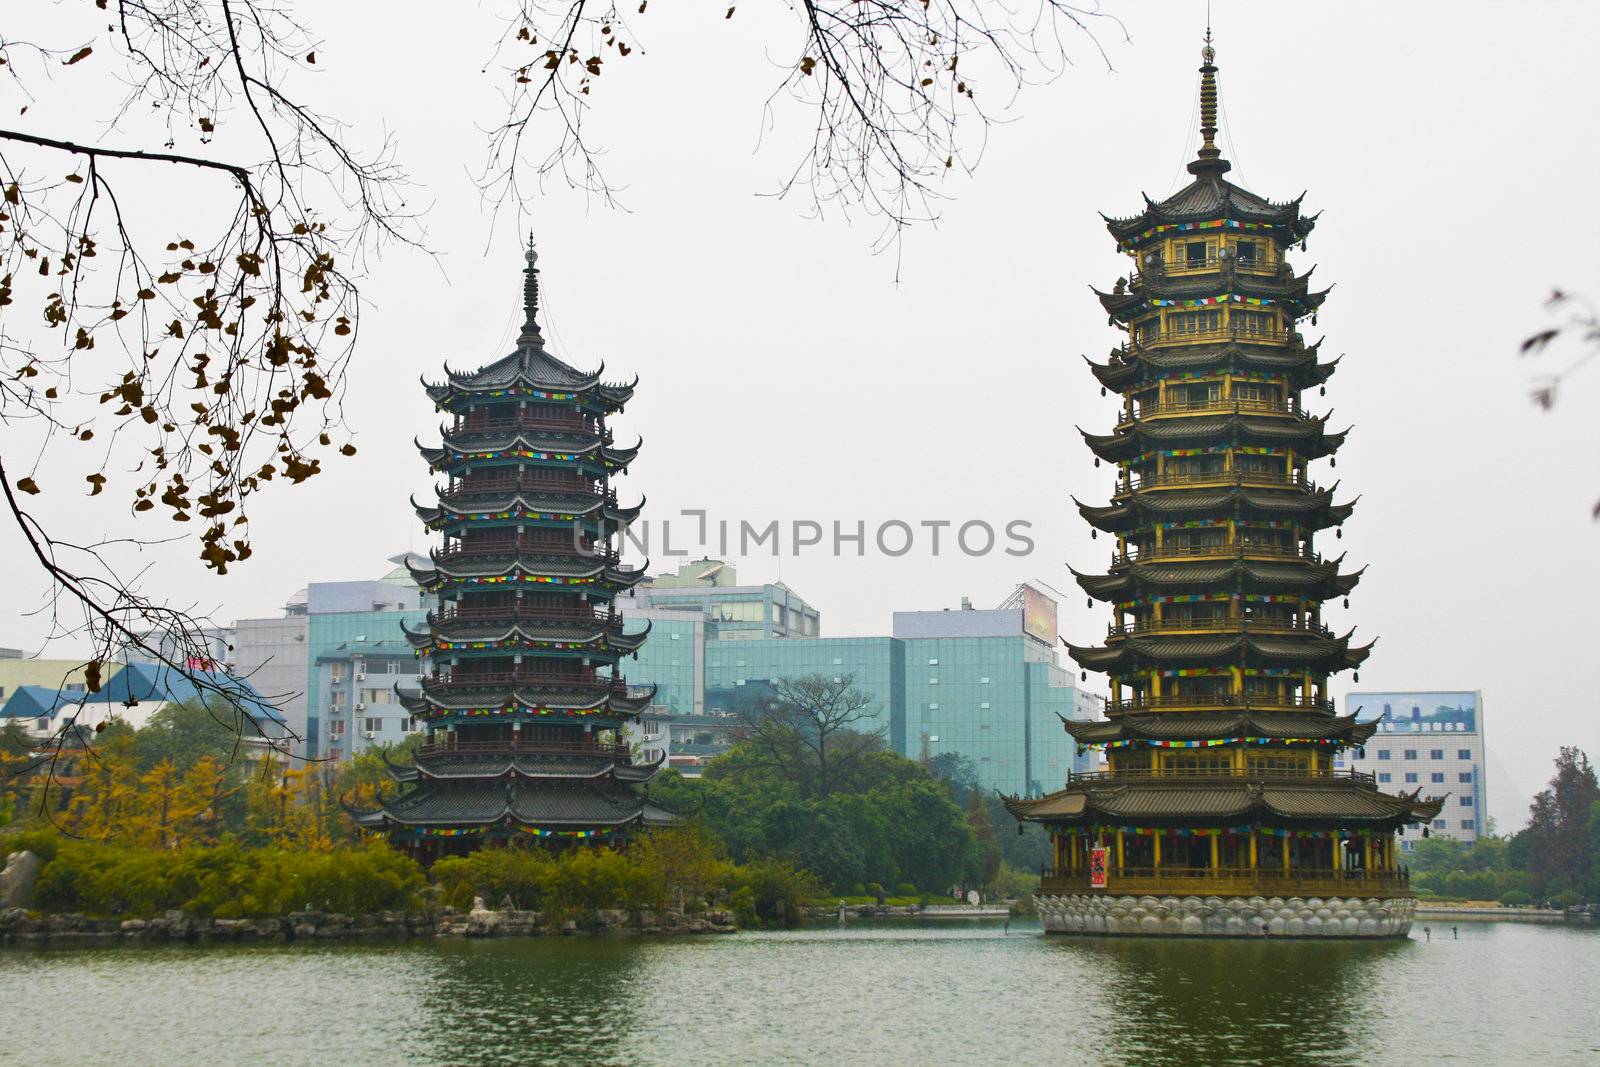 Chinese pagodas located in the middle of the pond in Guilin.